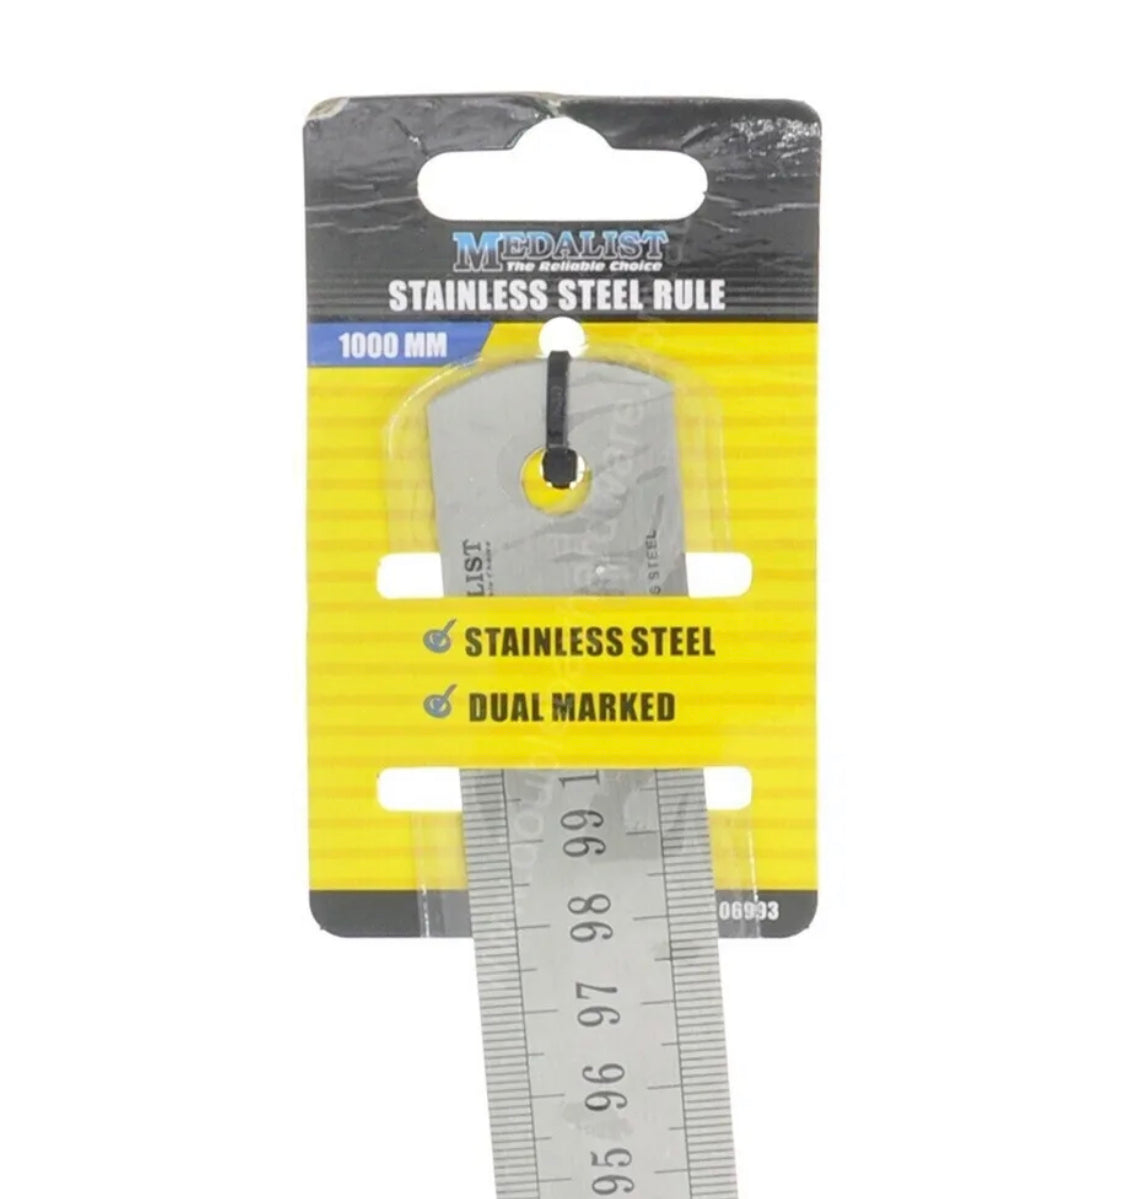 1000mm (40”) Stainless Steel Double Sided Imperial / Metric Ruler 06993 by Medalist